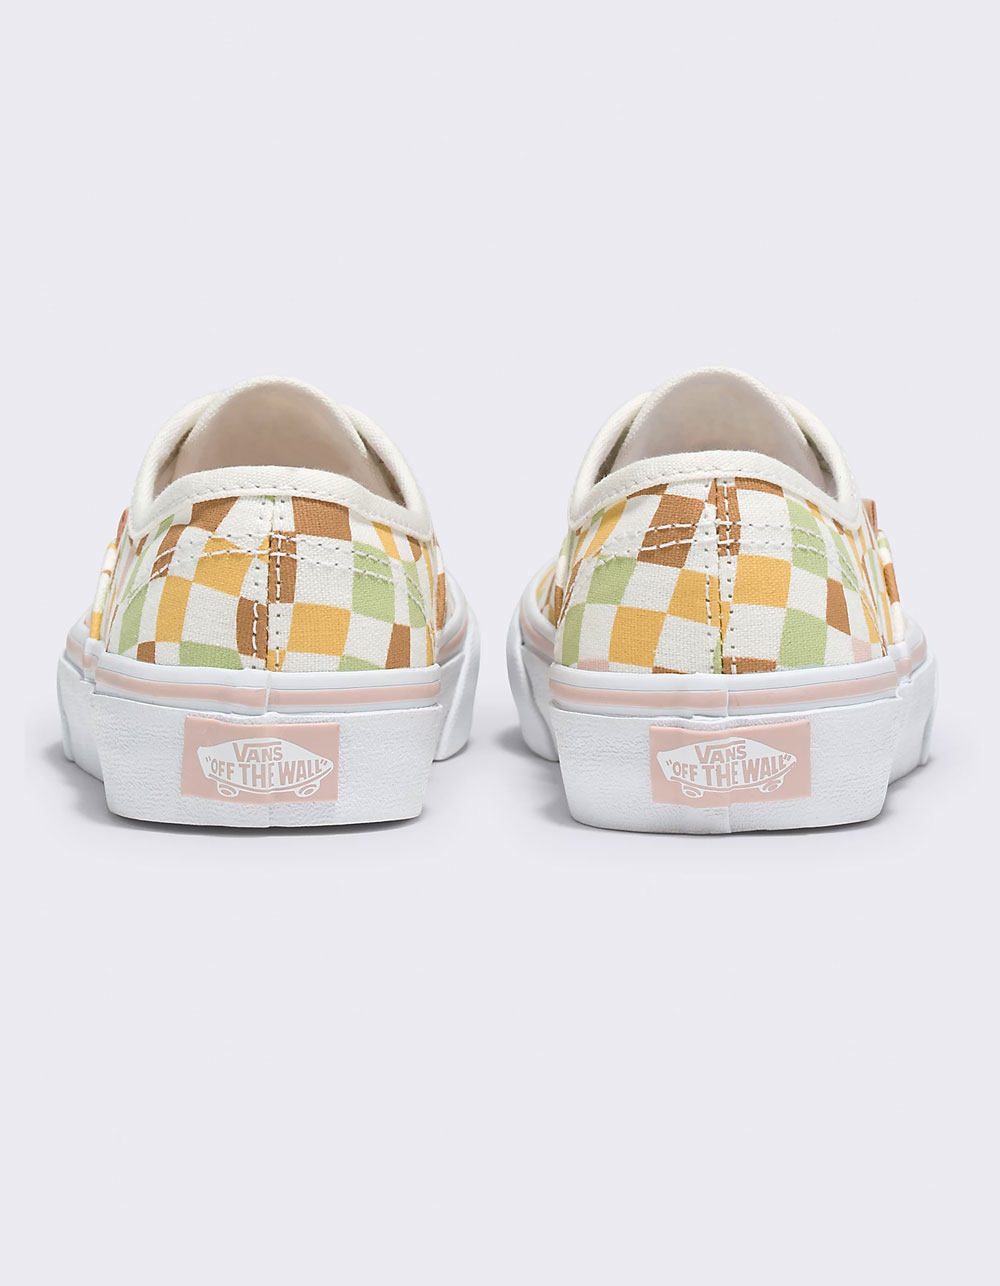 Vans Authentic Wavy Check Girls Shoes - Multi-Colored - 1